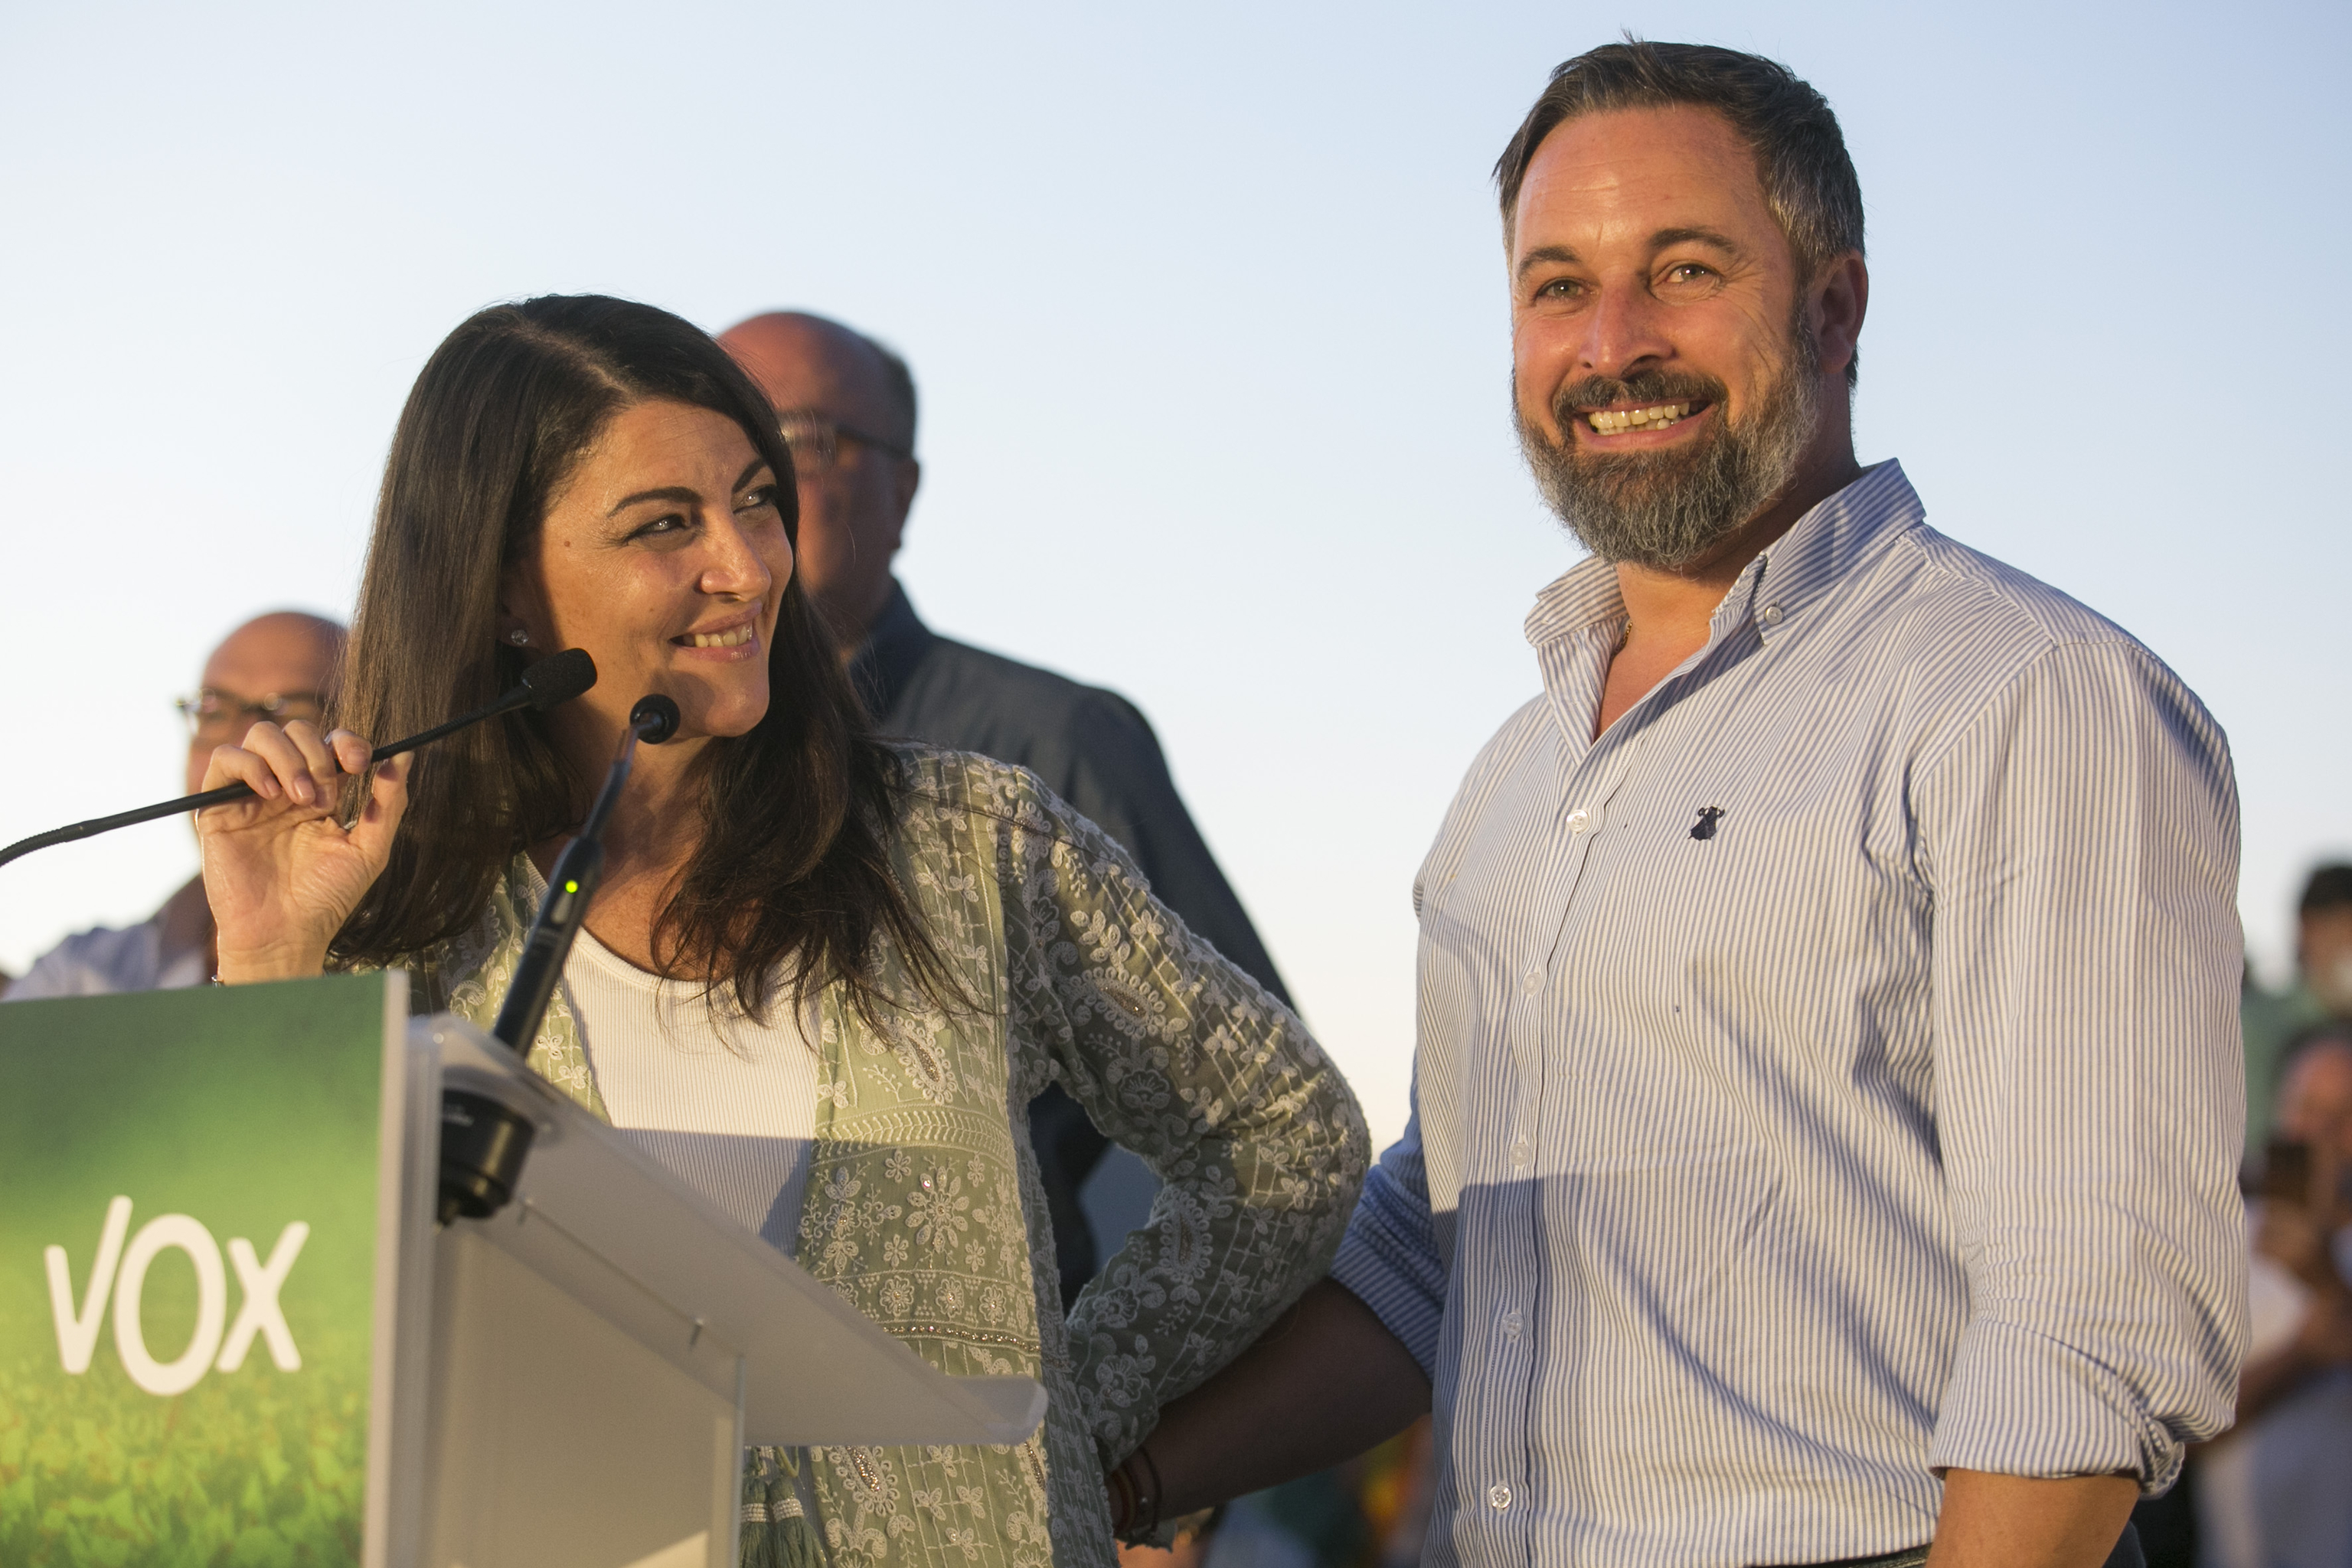 Macarena Olona and Santiago Abascal, M.  in an act